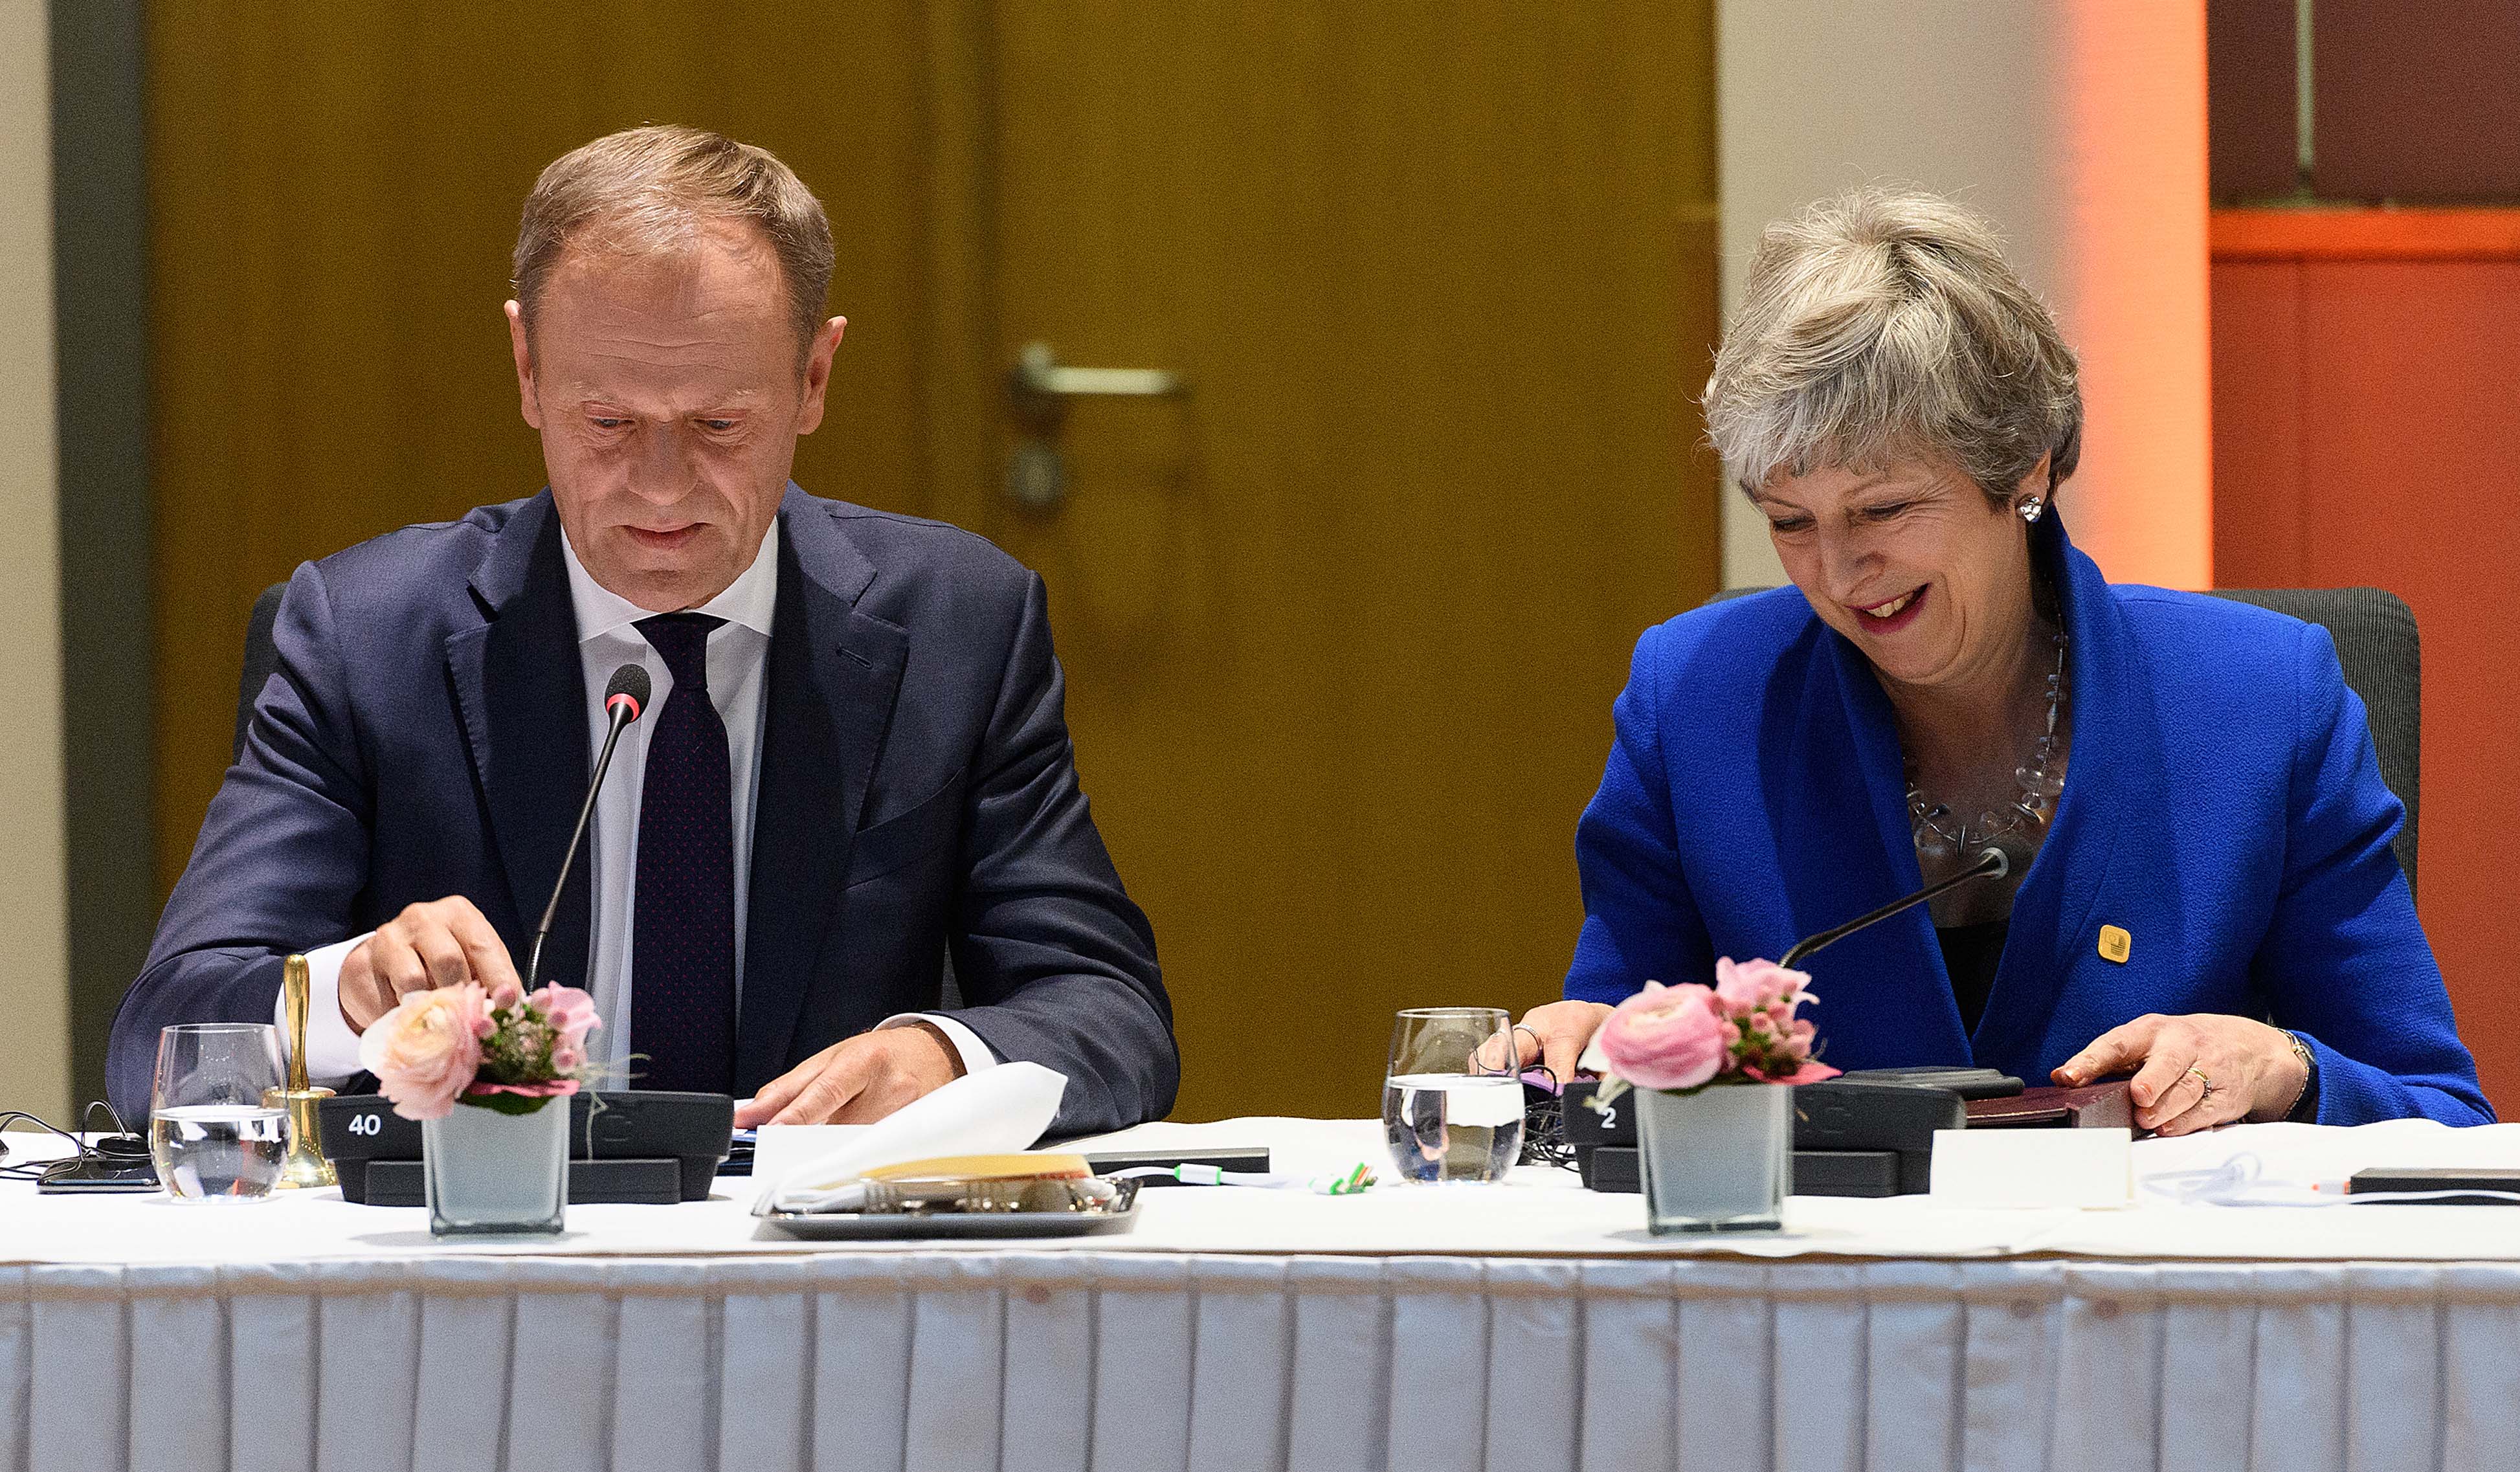 President of the European Council Donald Tusk and Prime Minister Theresa May attend a round table meeting in Brussels, Belgium.